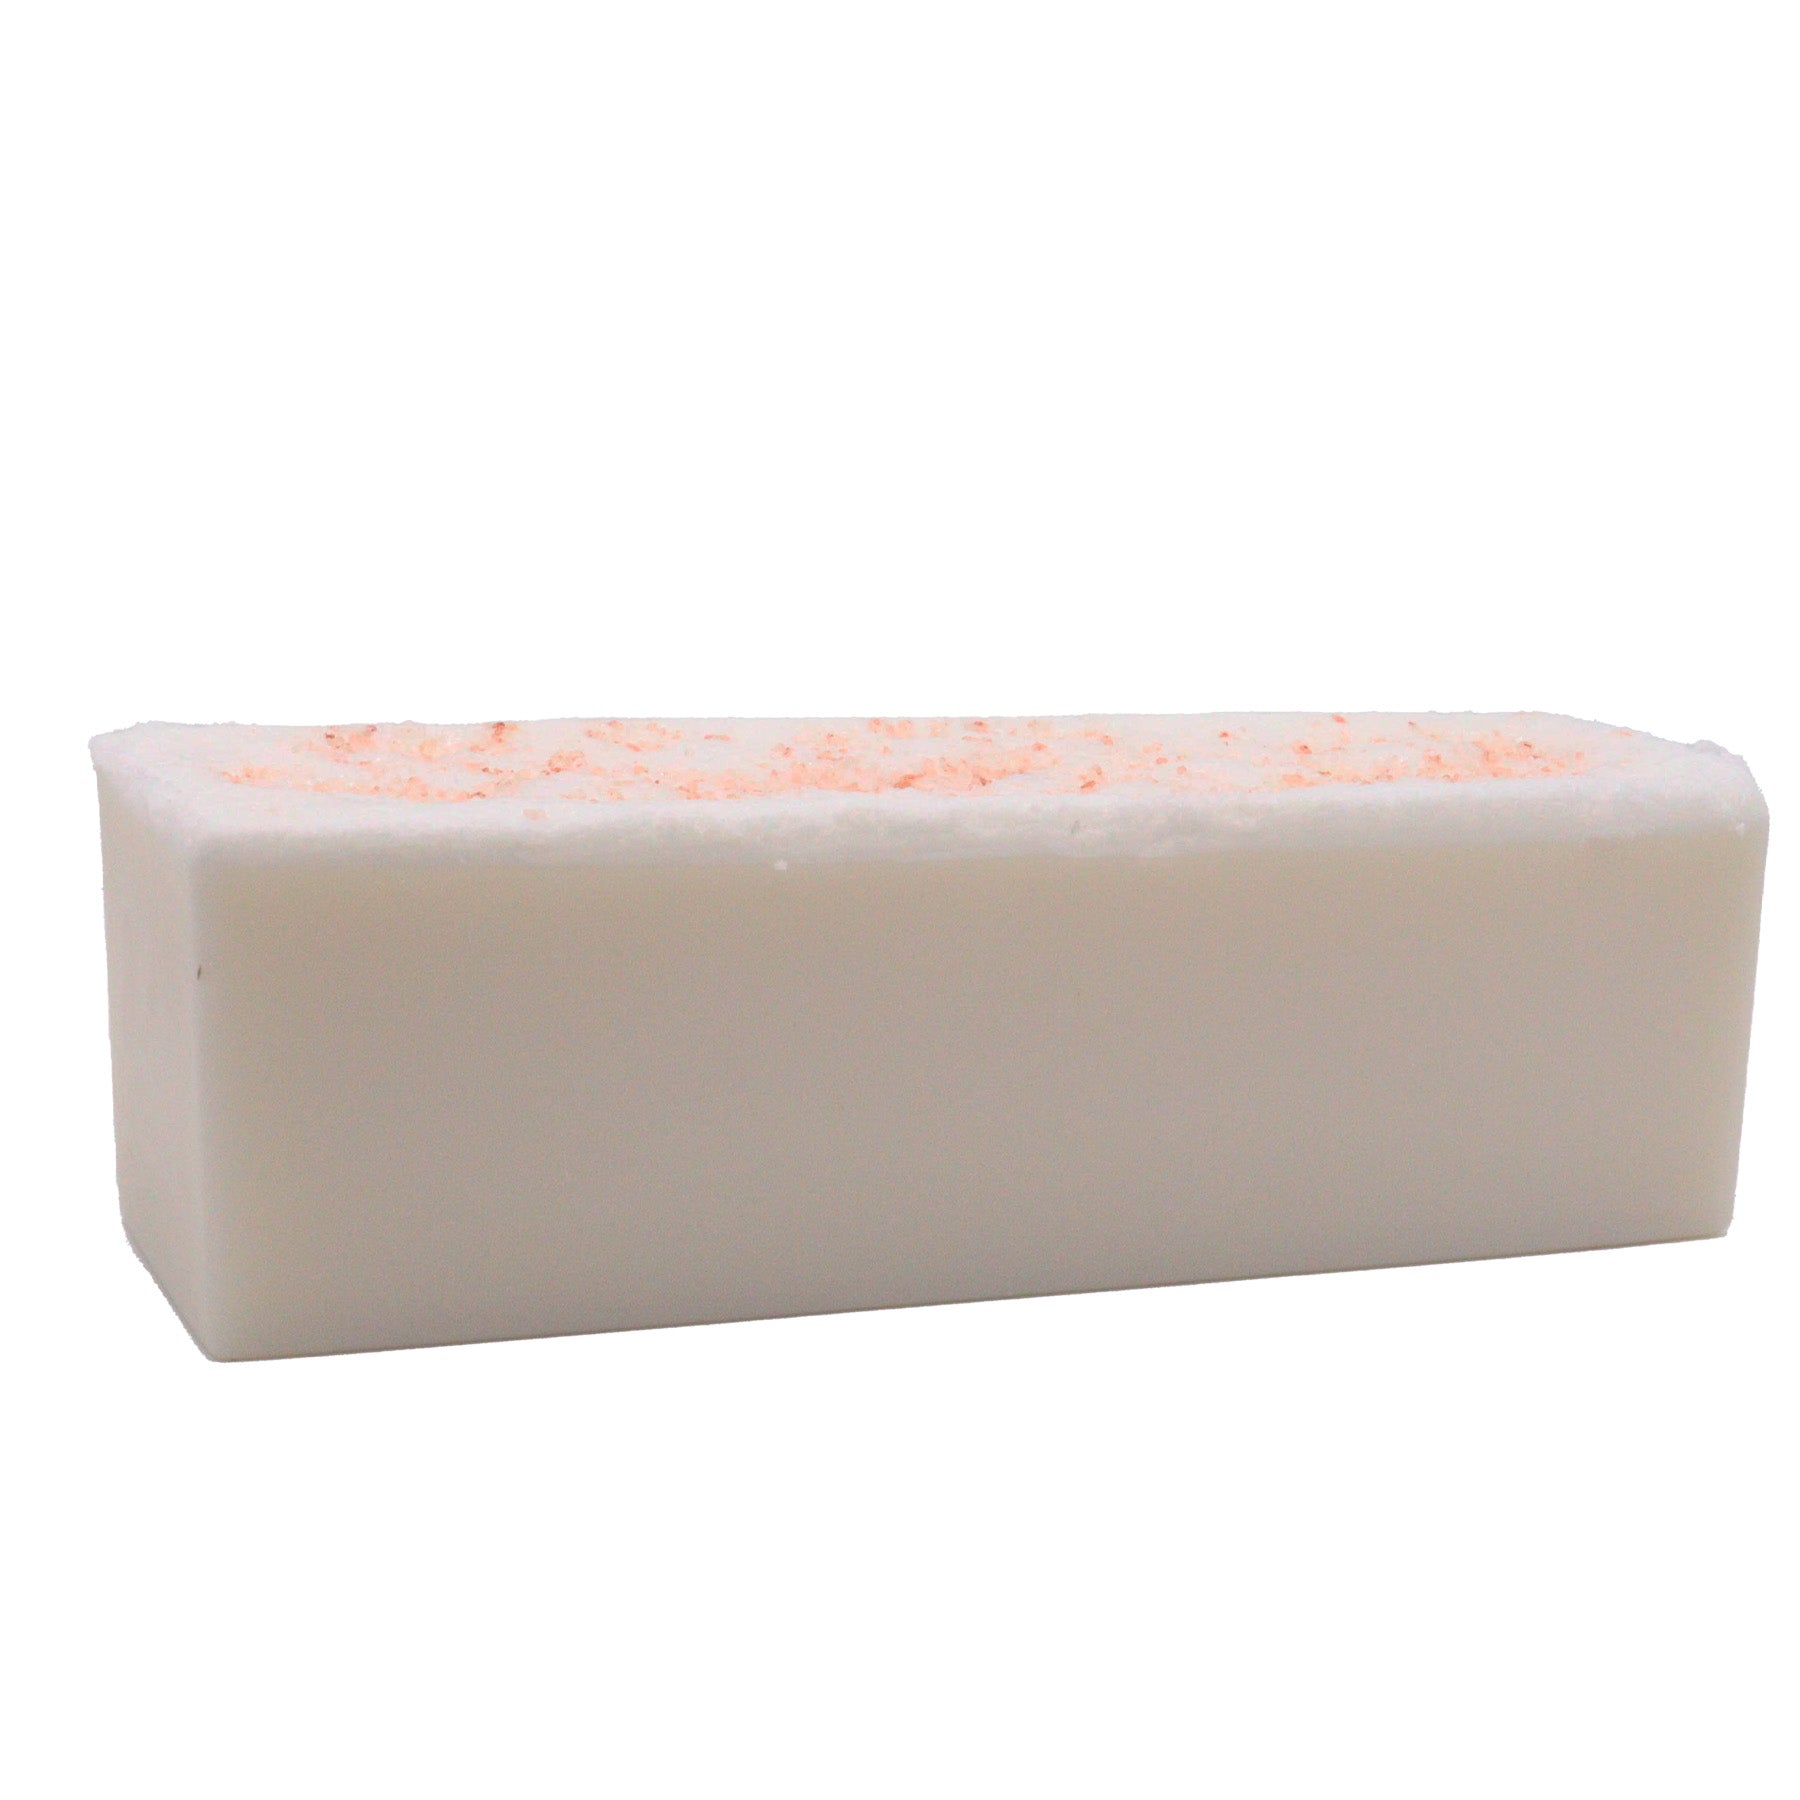 View Himalayan Cava Soap Loaf information